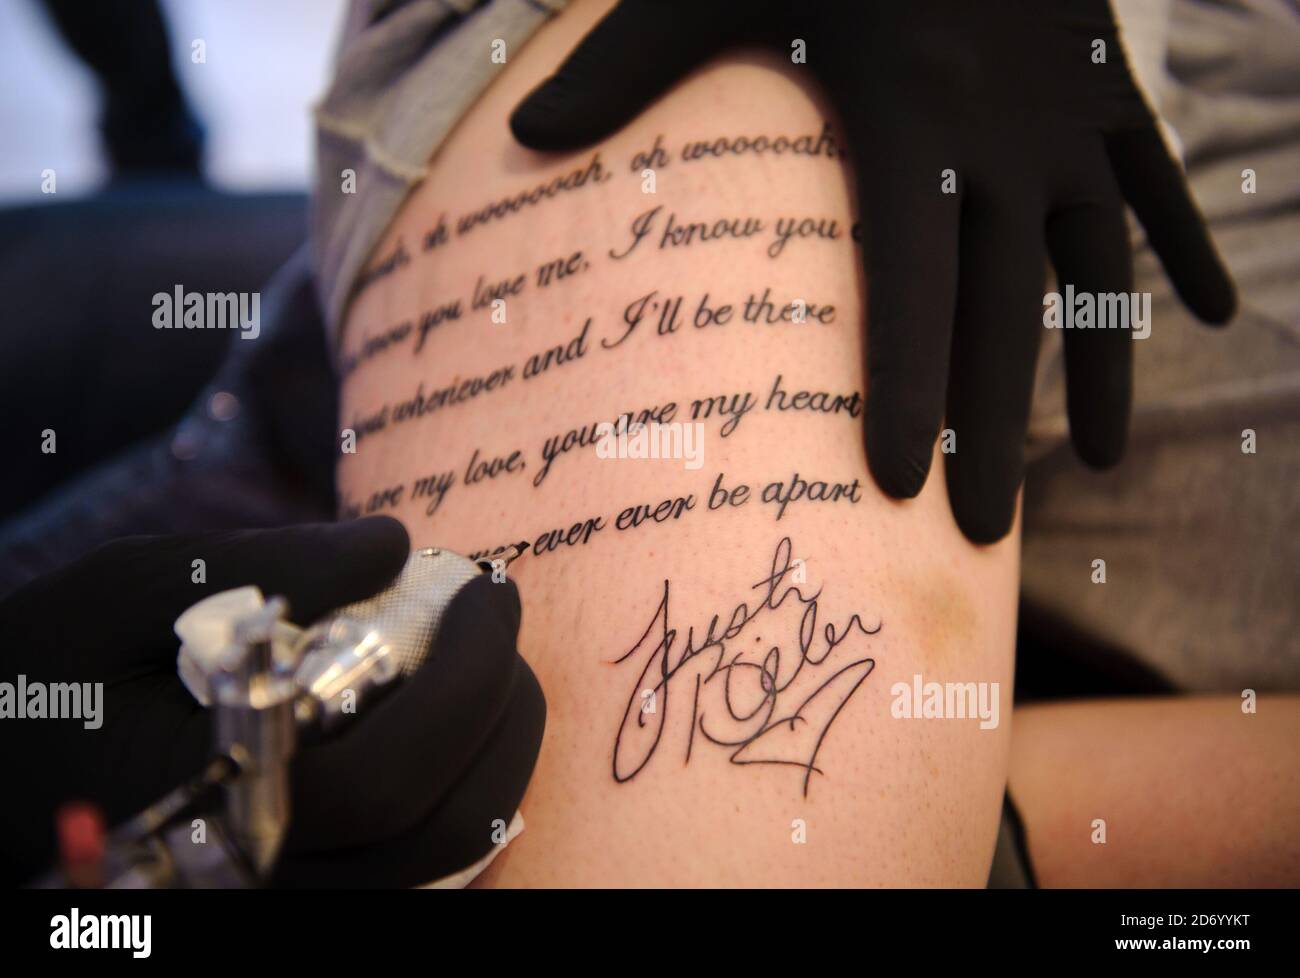 MTV competition finalist Sarah Burgoyne (24) shows what she is willing to  do for music by tattooing Justin Bieber lyrics on her thigh, at the Good  Time tattoo studio in east London.